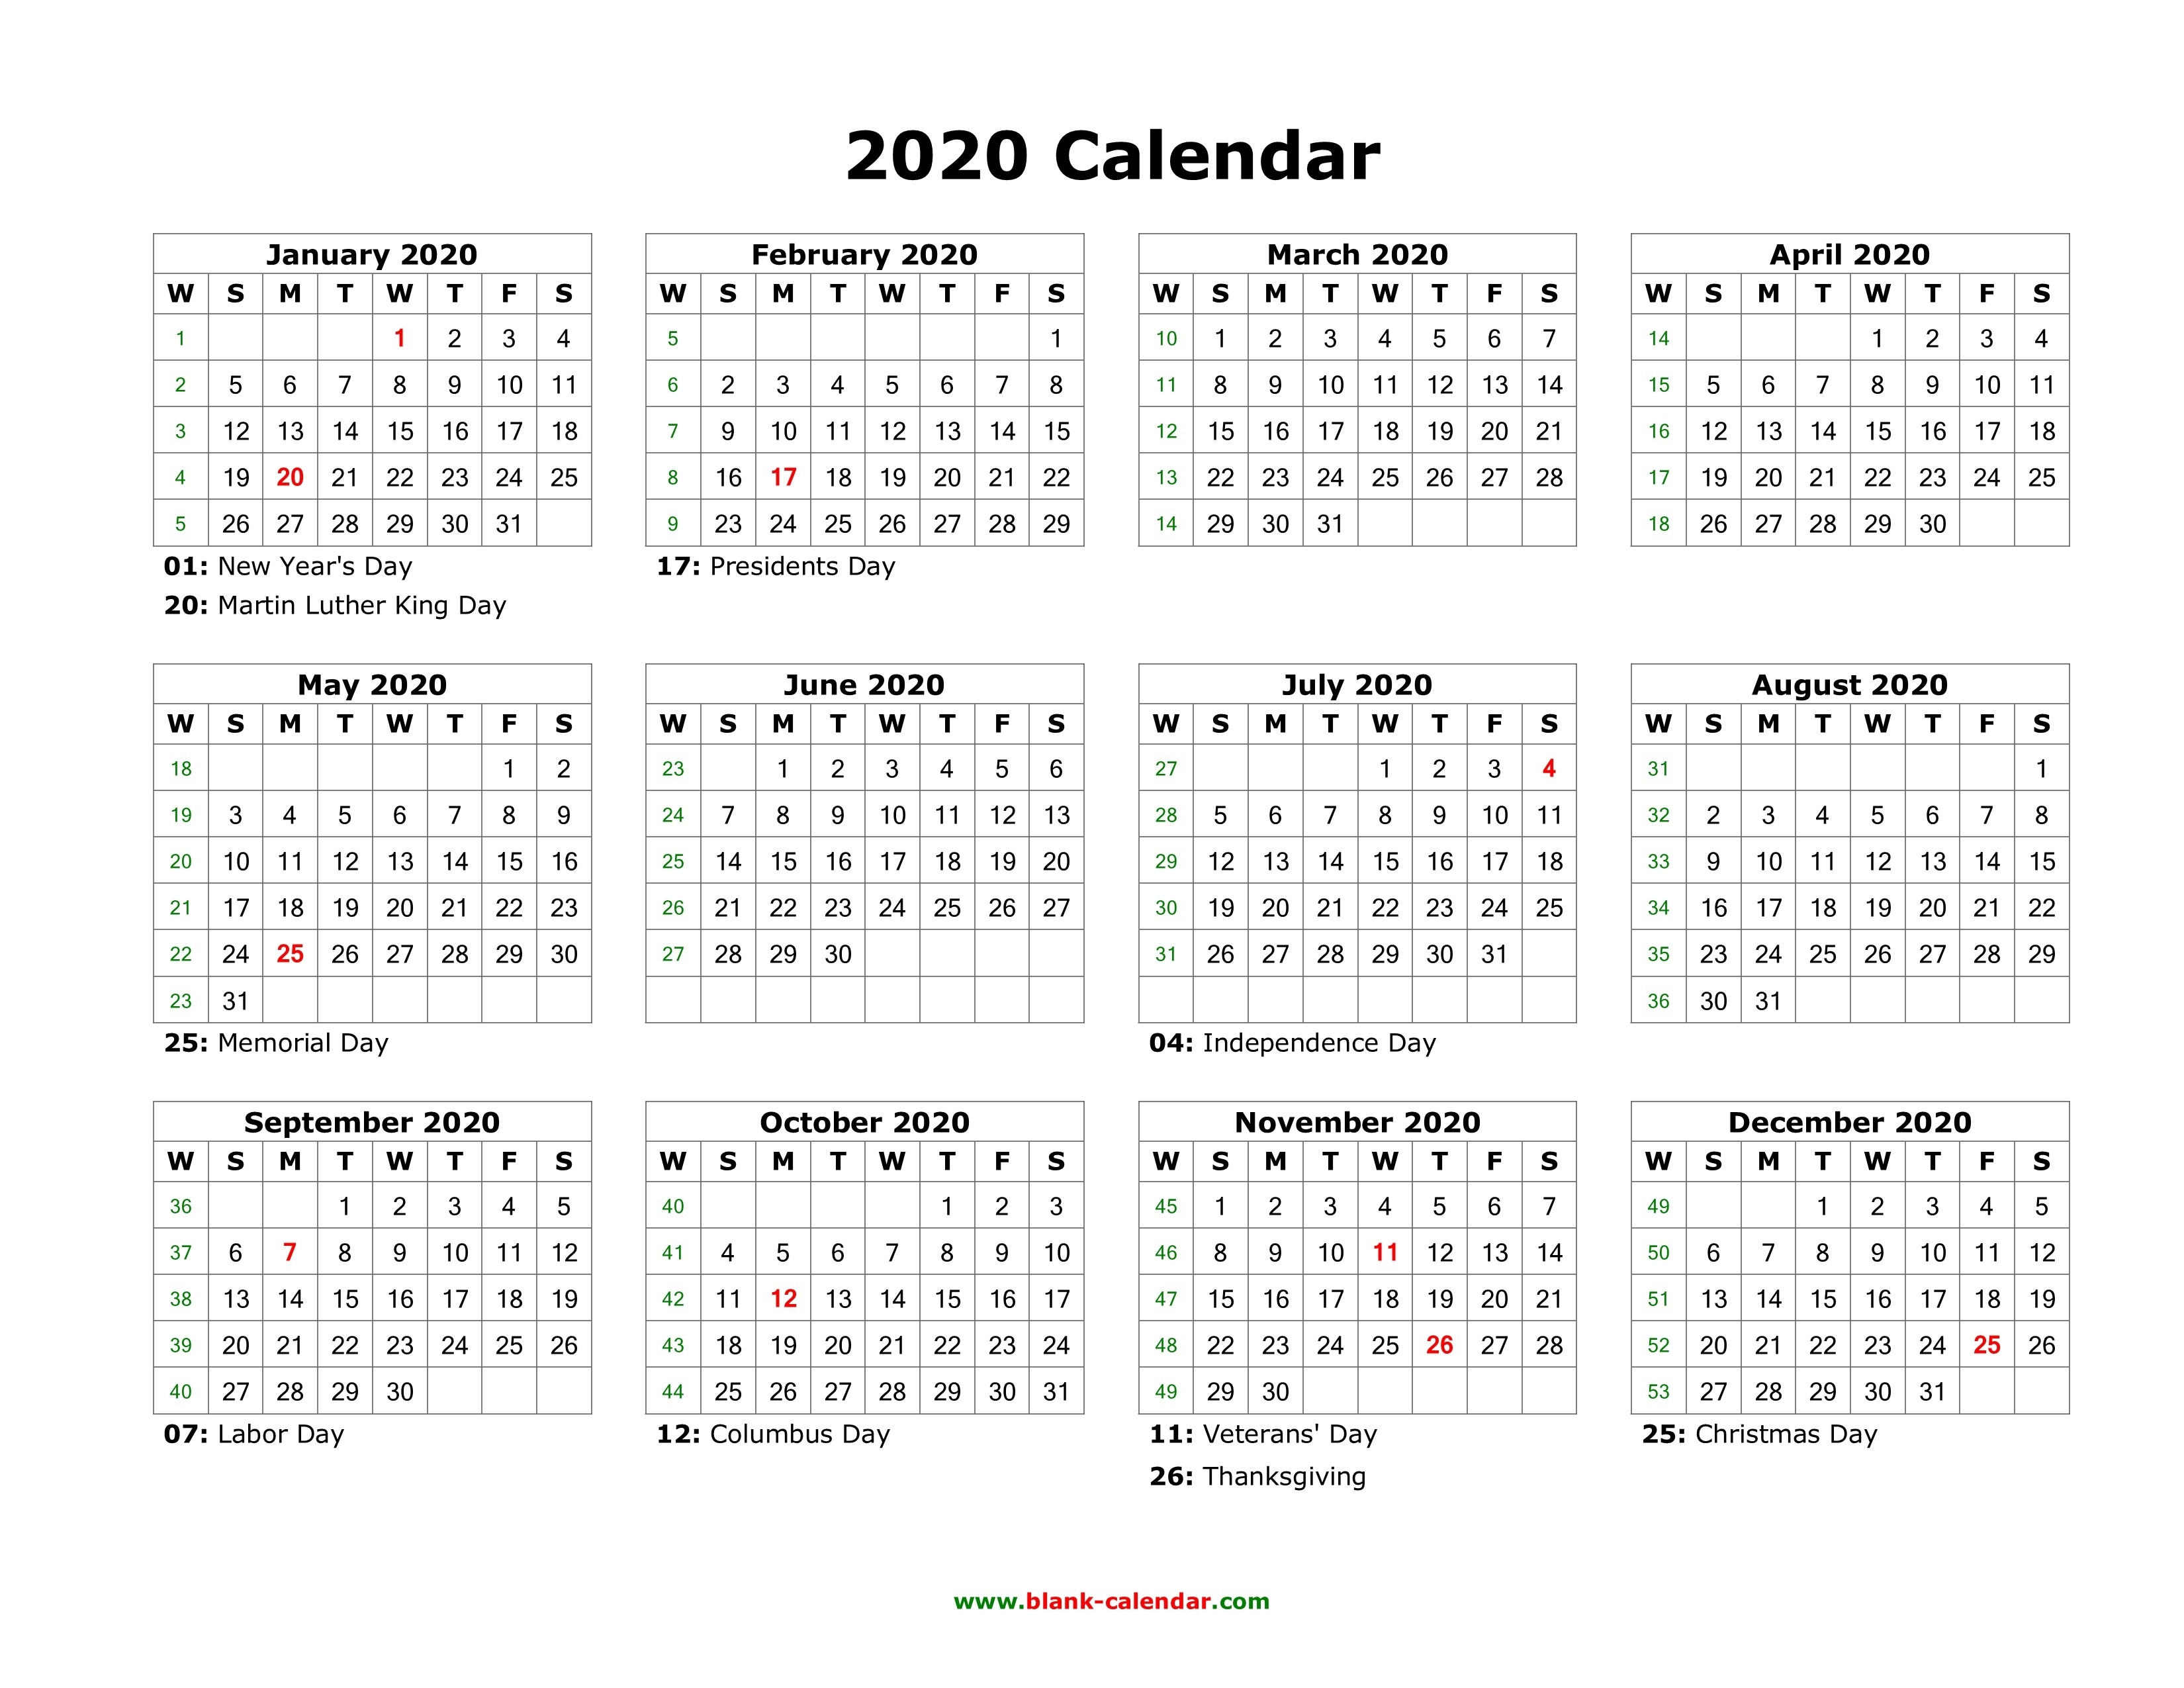 Download Blank Calendar 2020 With Us Holidays (12 Months On-Blank 5 Day Calendar 2020